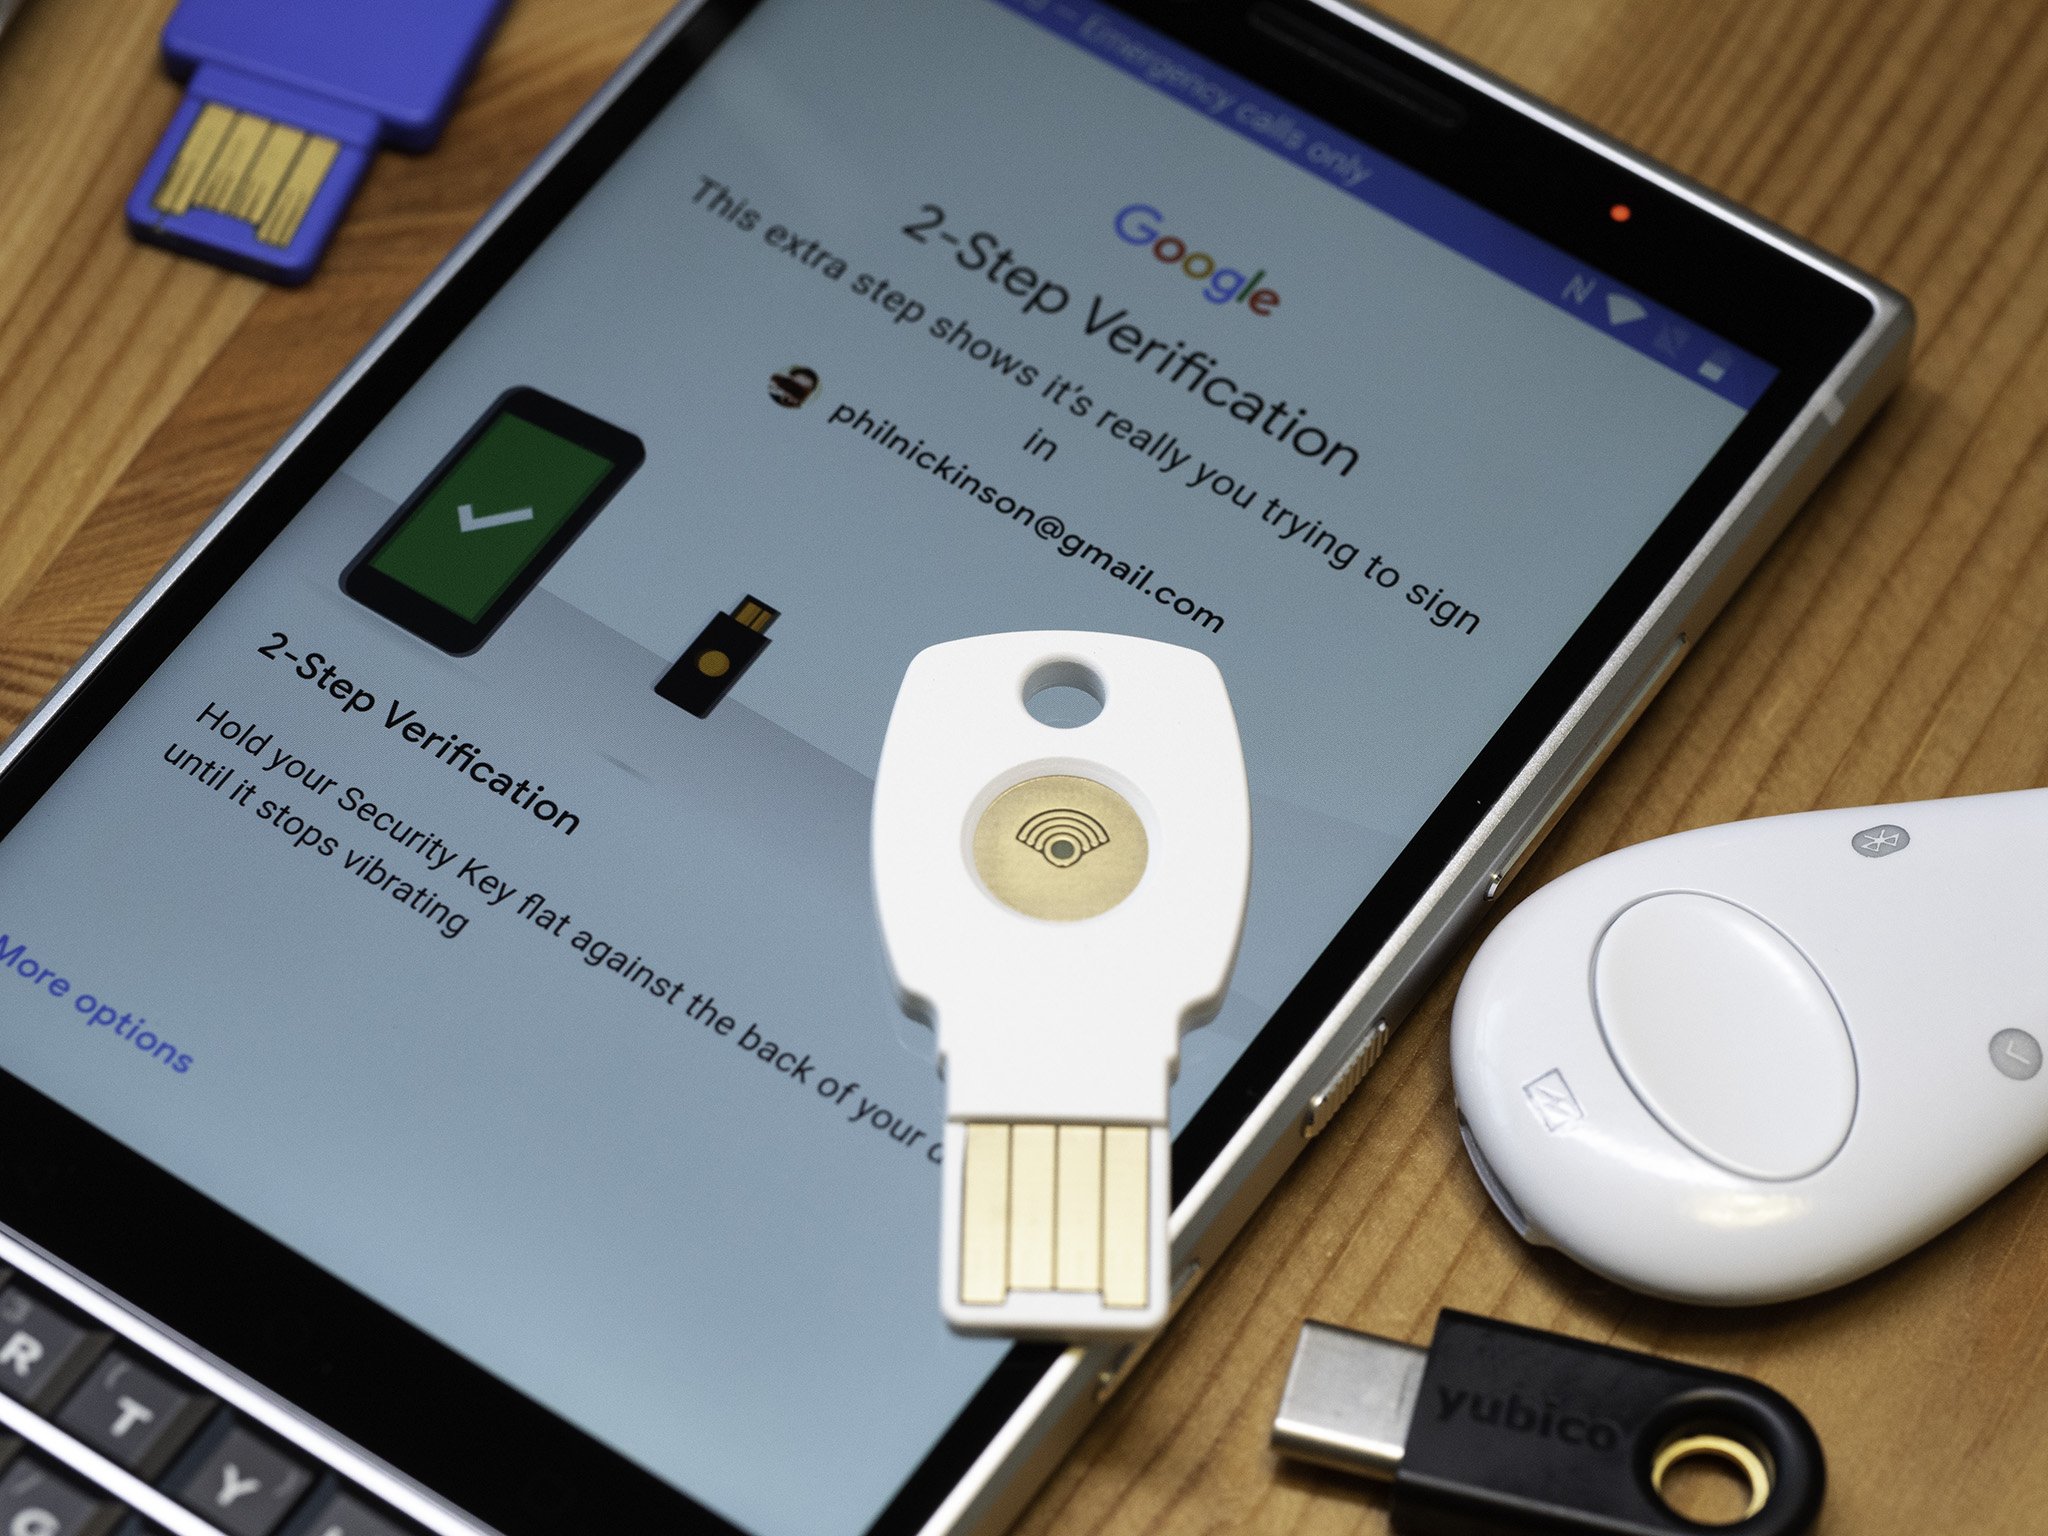 Google Titan Security Key bundle is now available for $50